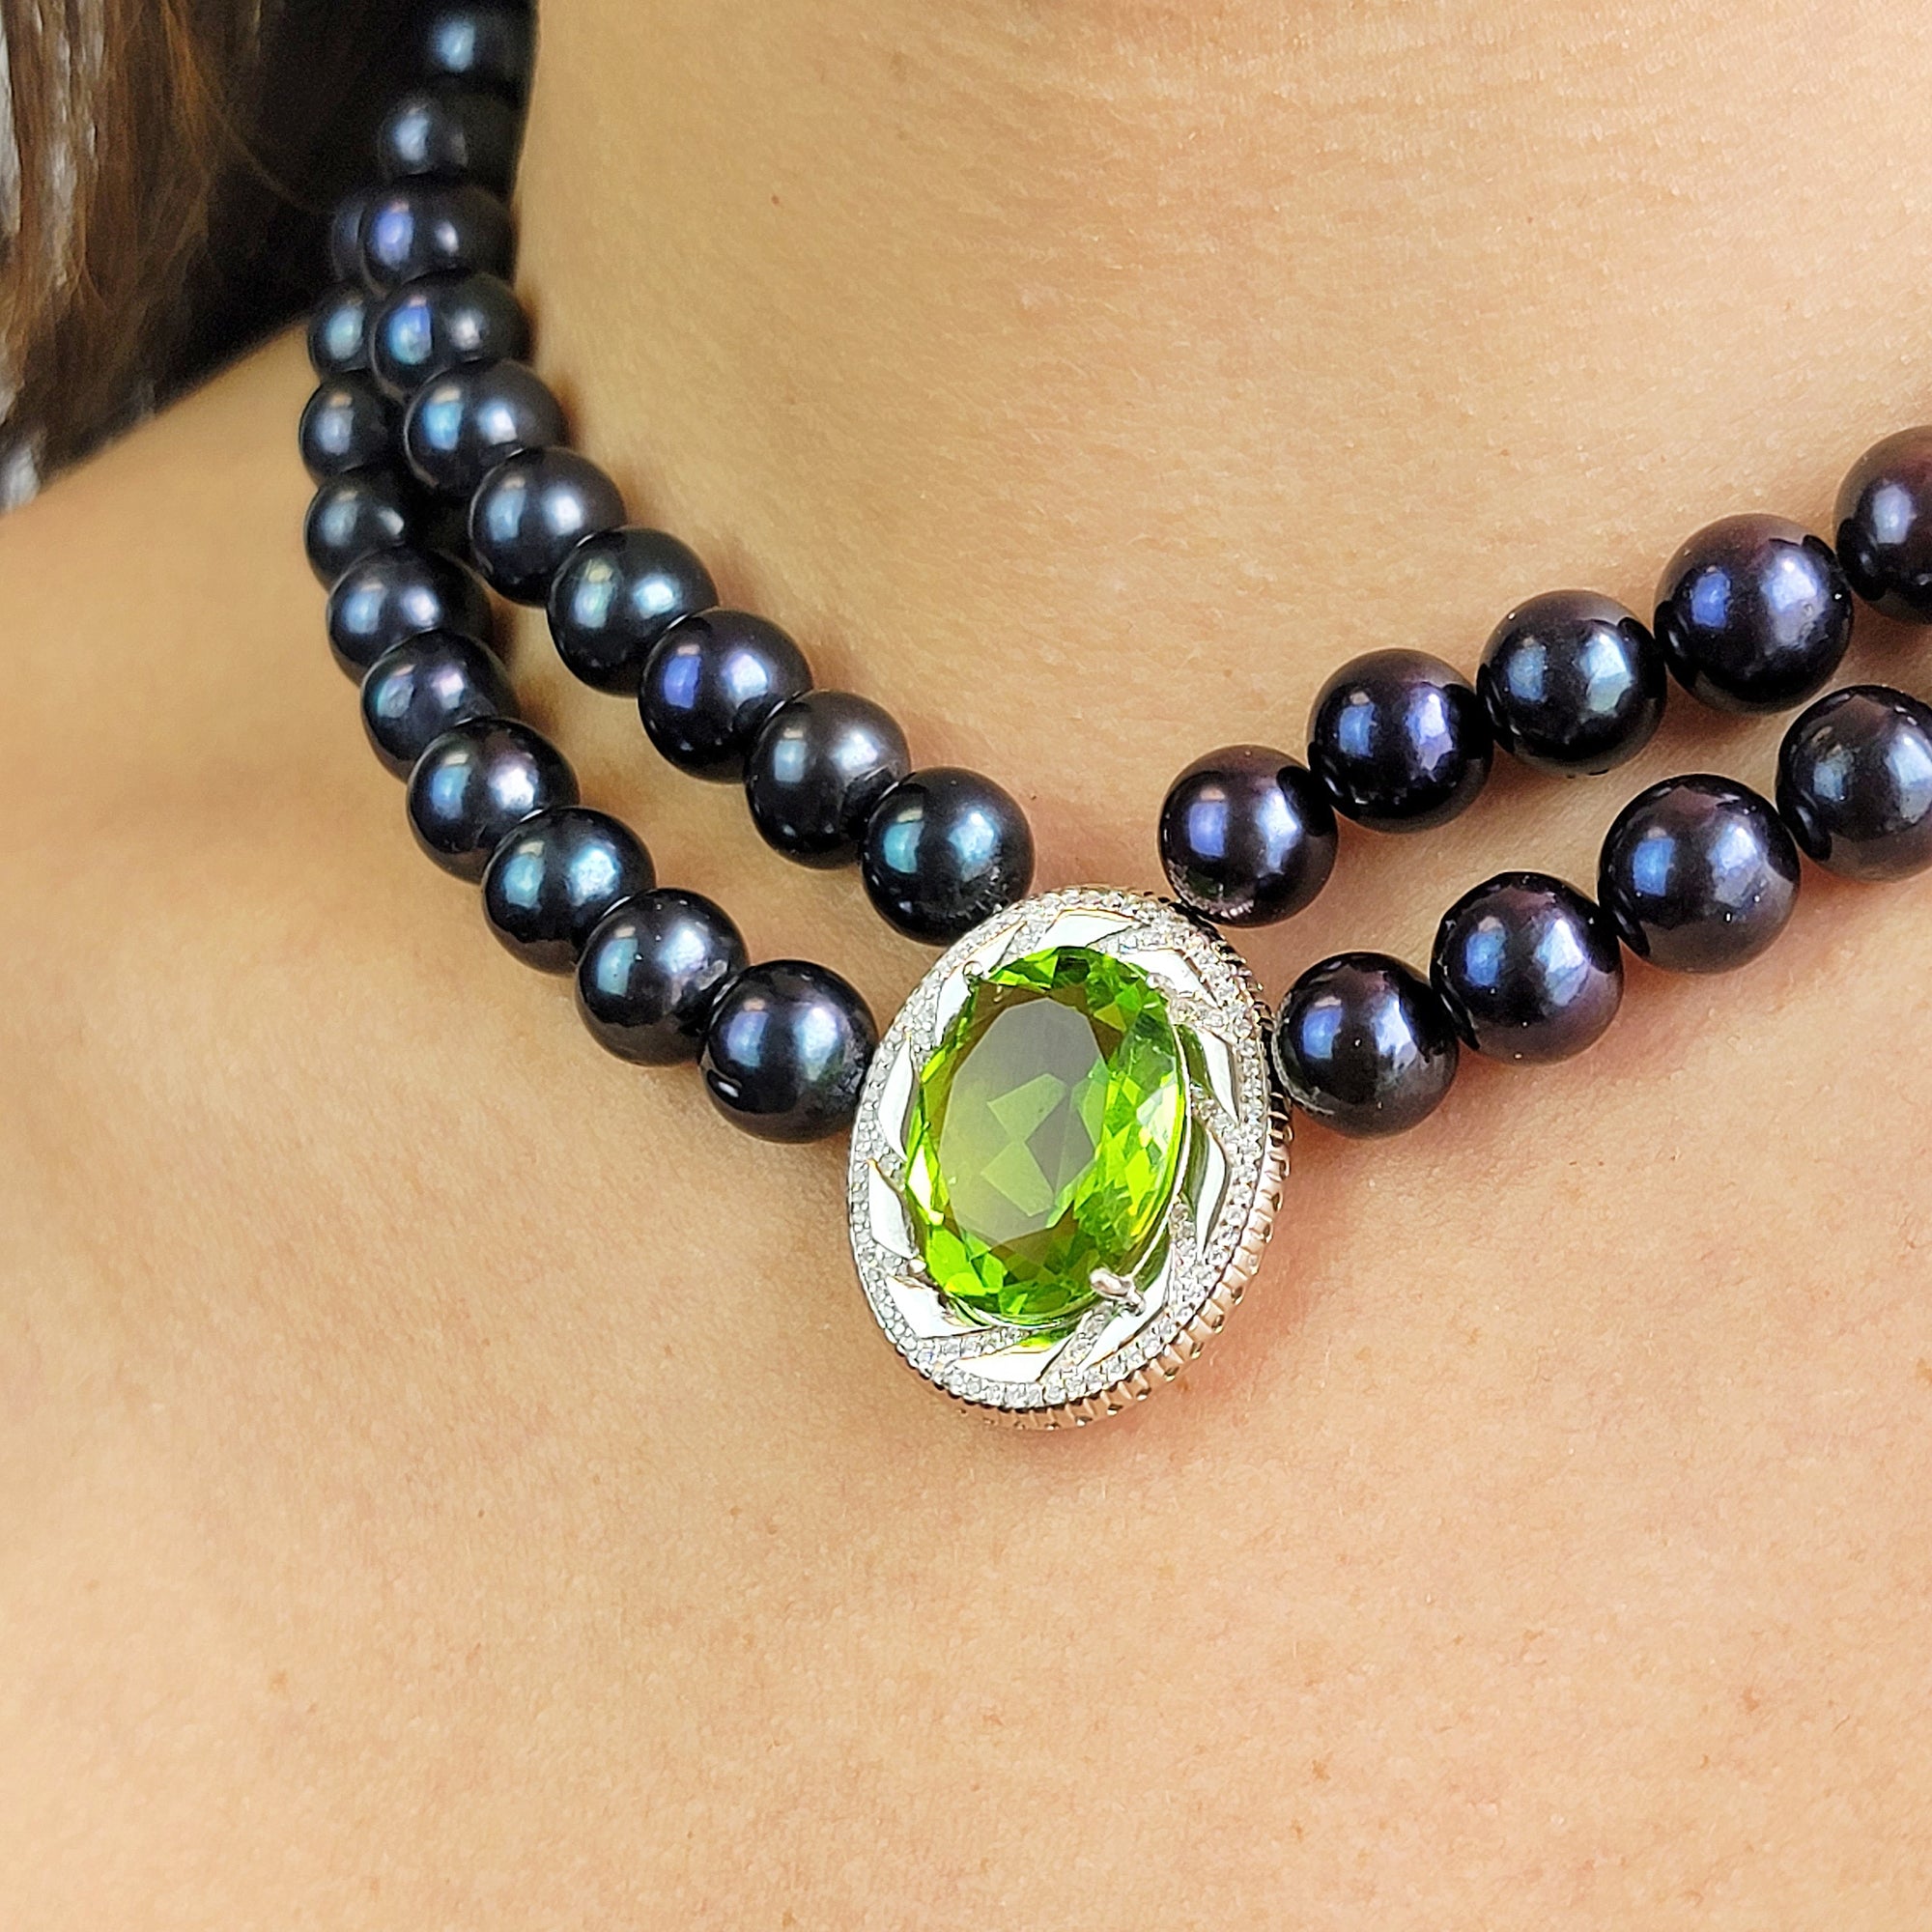 Green Peridot and Pearl Necklace